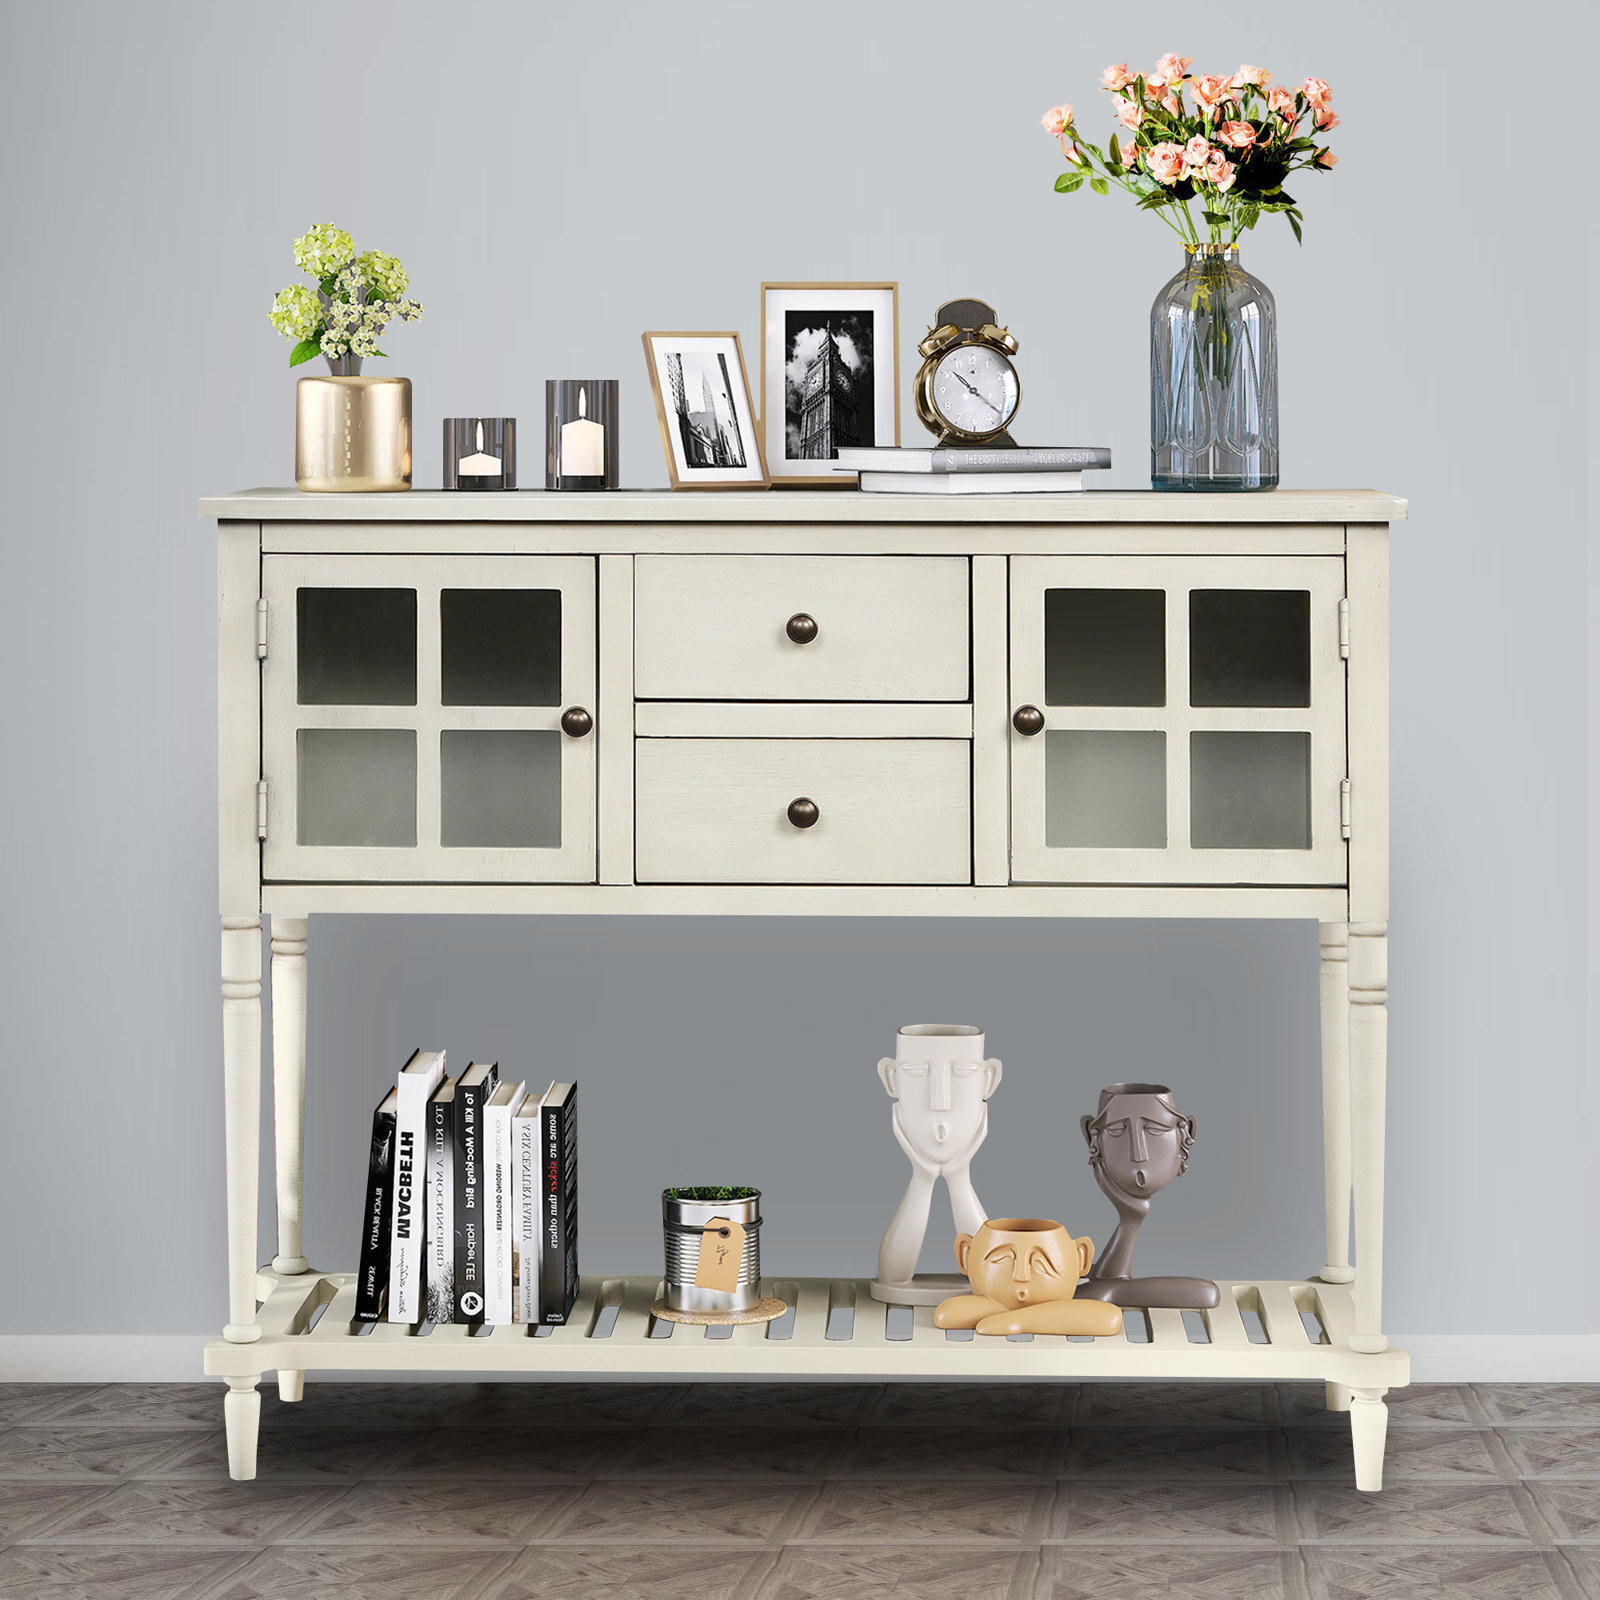 Subtly distressed sideboard table with shelf